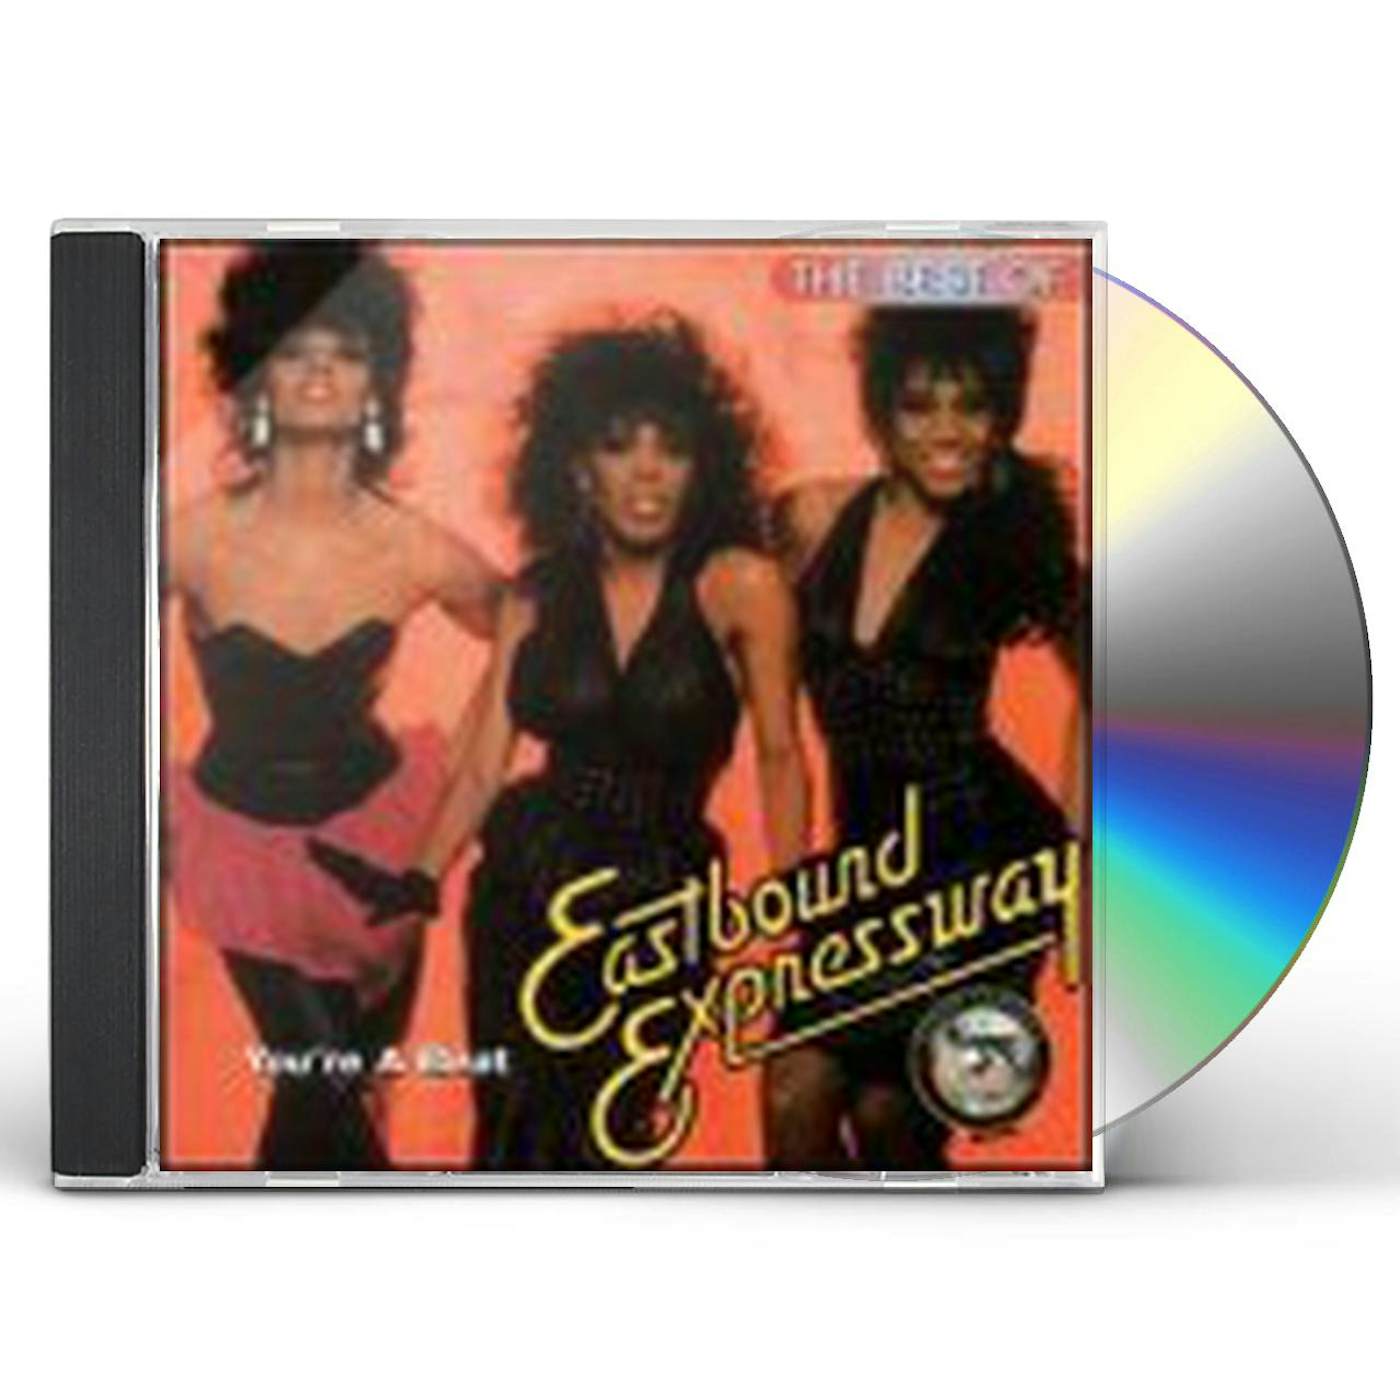 Eastbound Expressway BEST OF: YOU'RE A BEAT CD